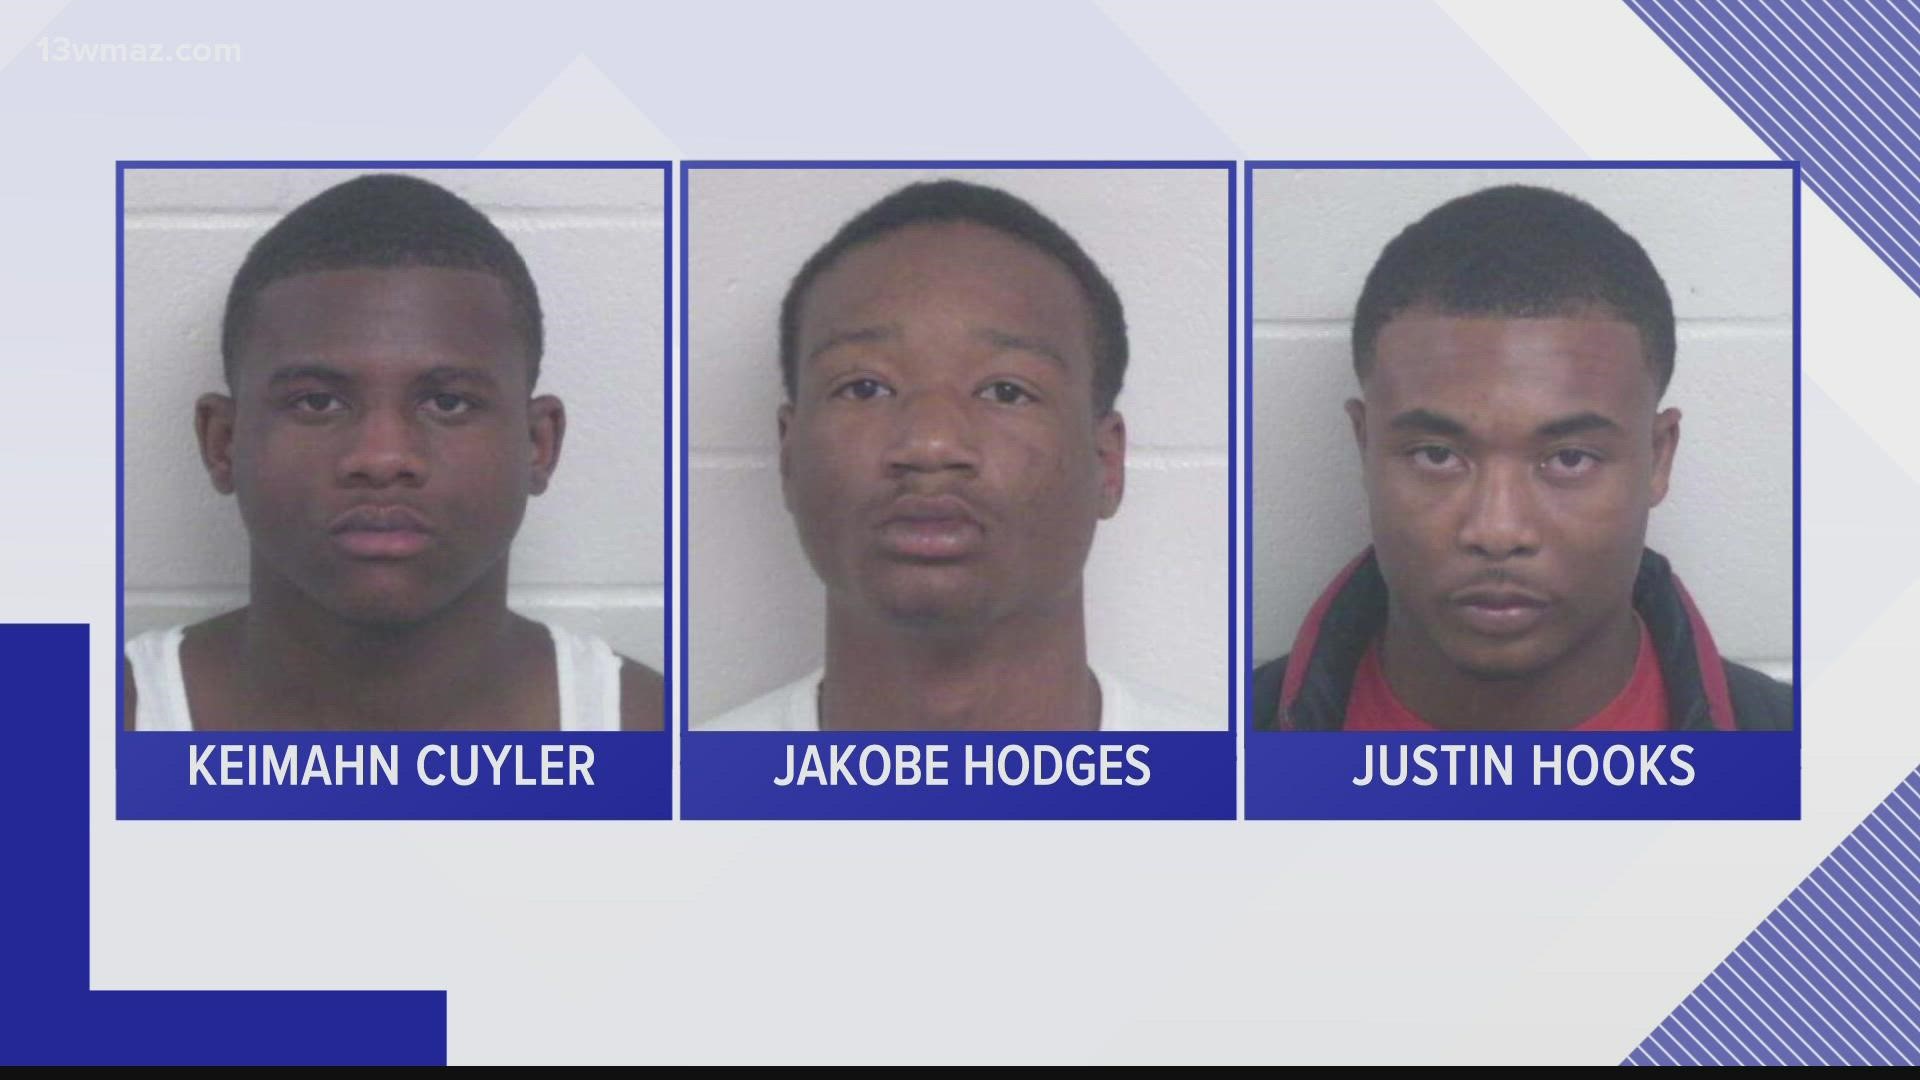 Washington County deputies have now arrested the three men in connection with Sunday night’s shootings.